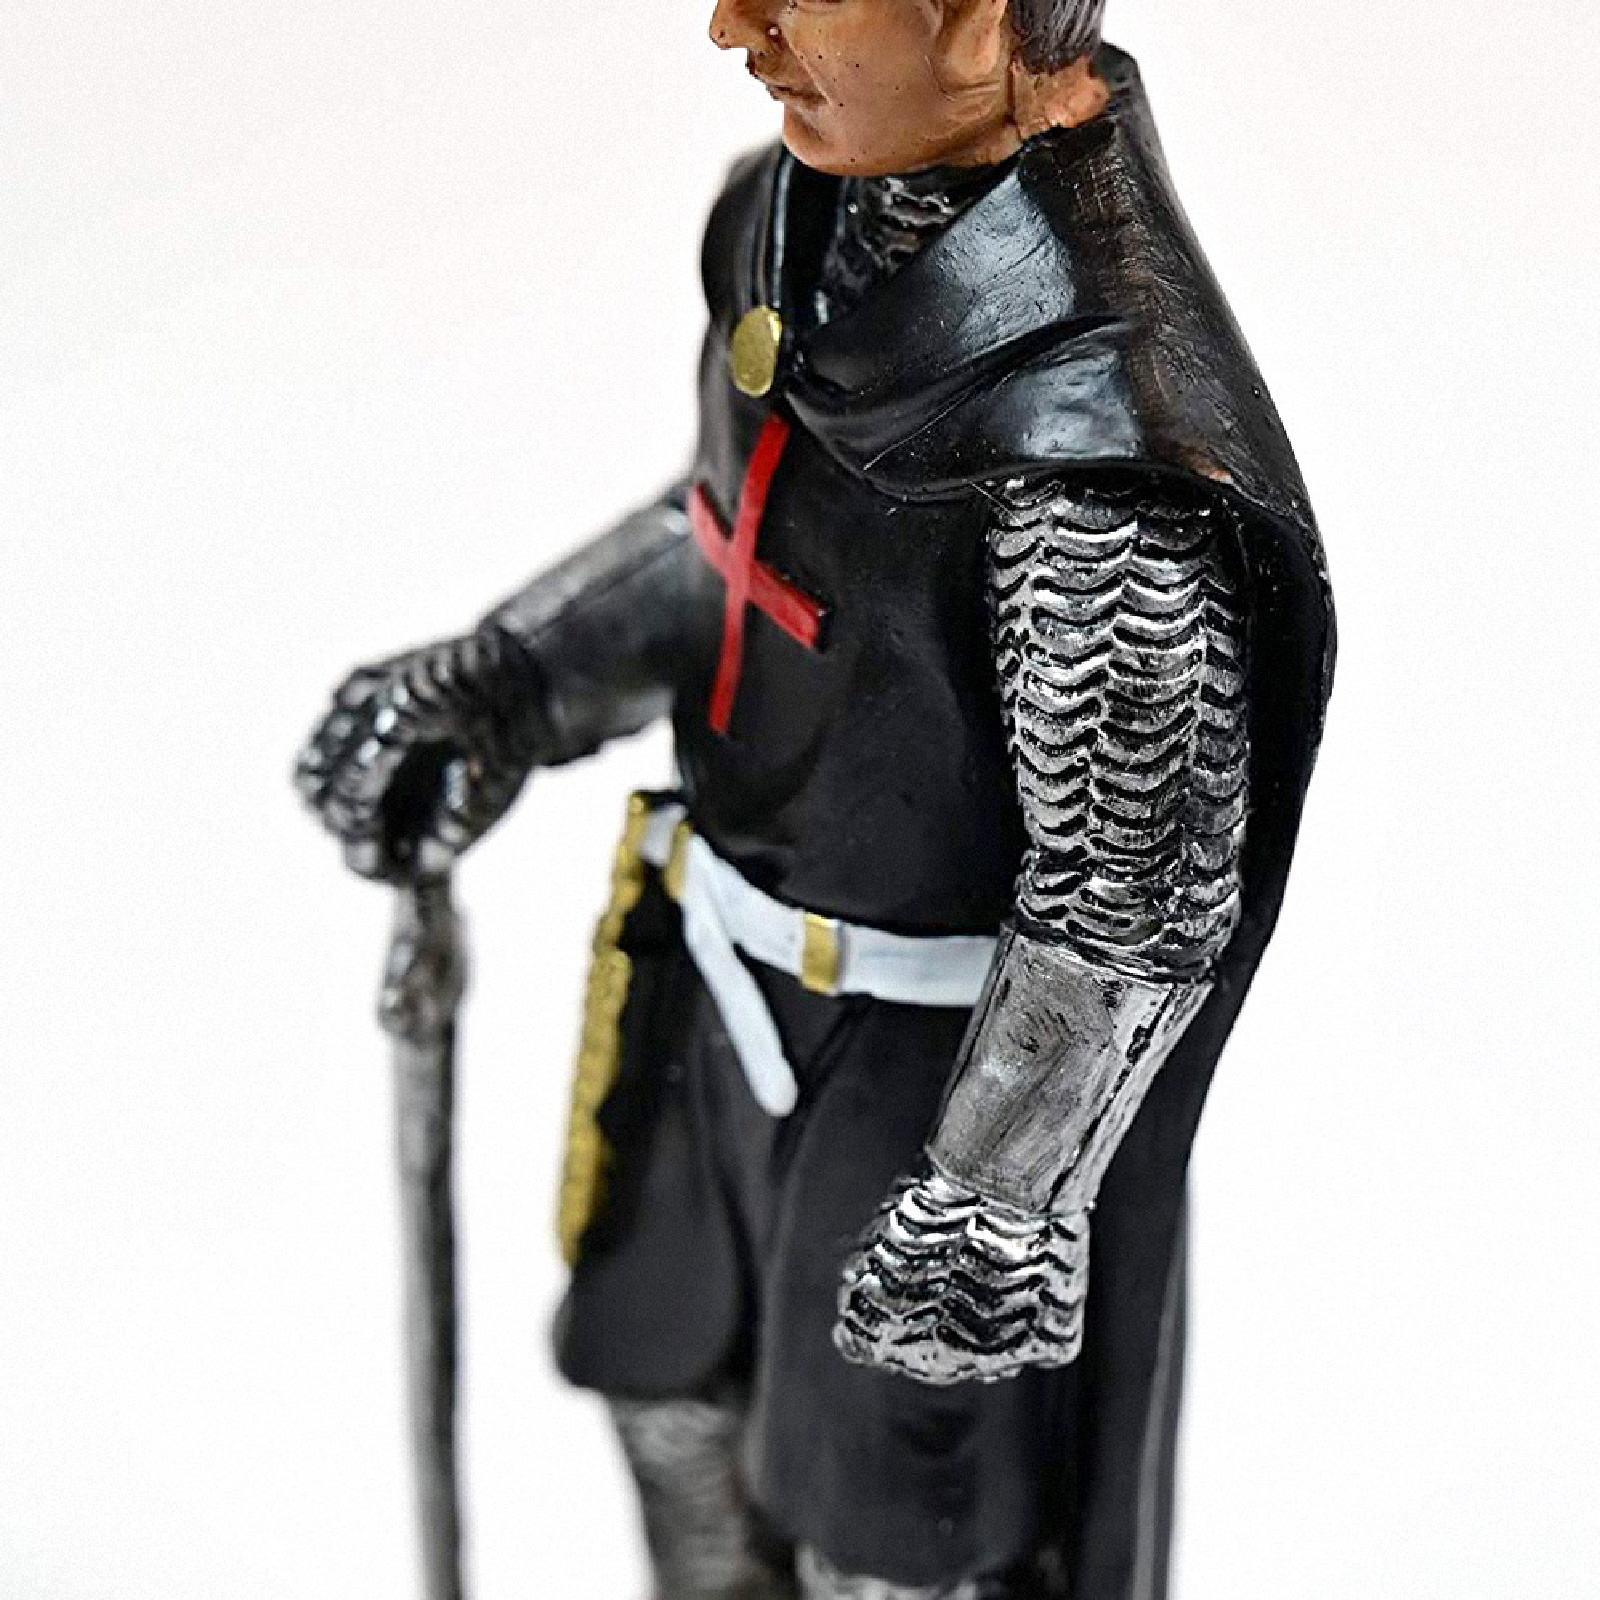 Miniature Knight made of resin